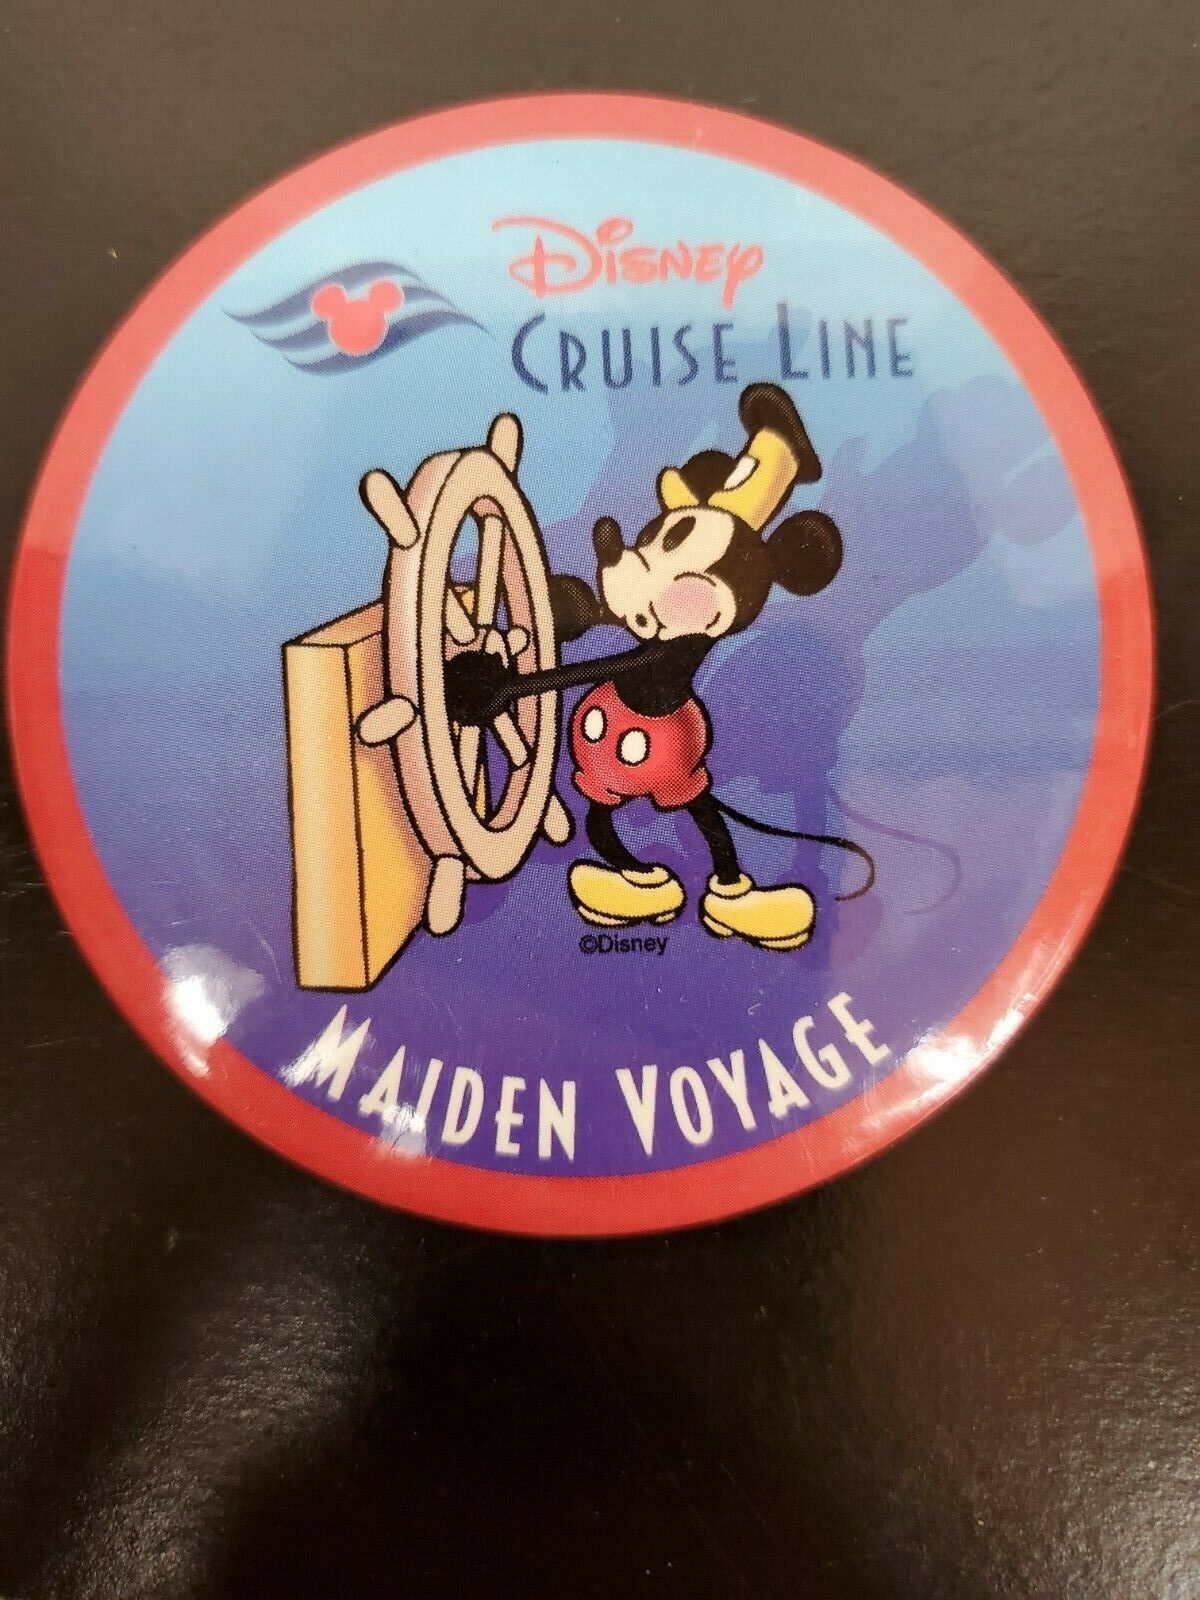 Disney Cruise Line Maiden Voyage Pin featuring Mickey Mouse